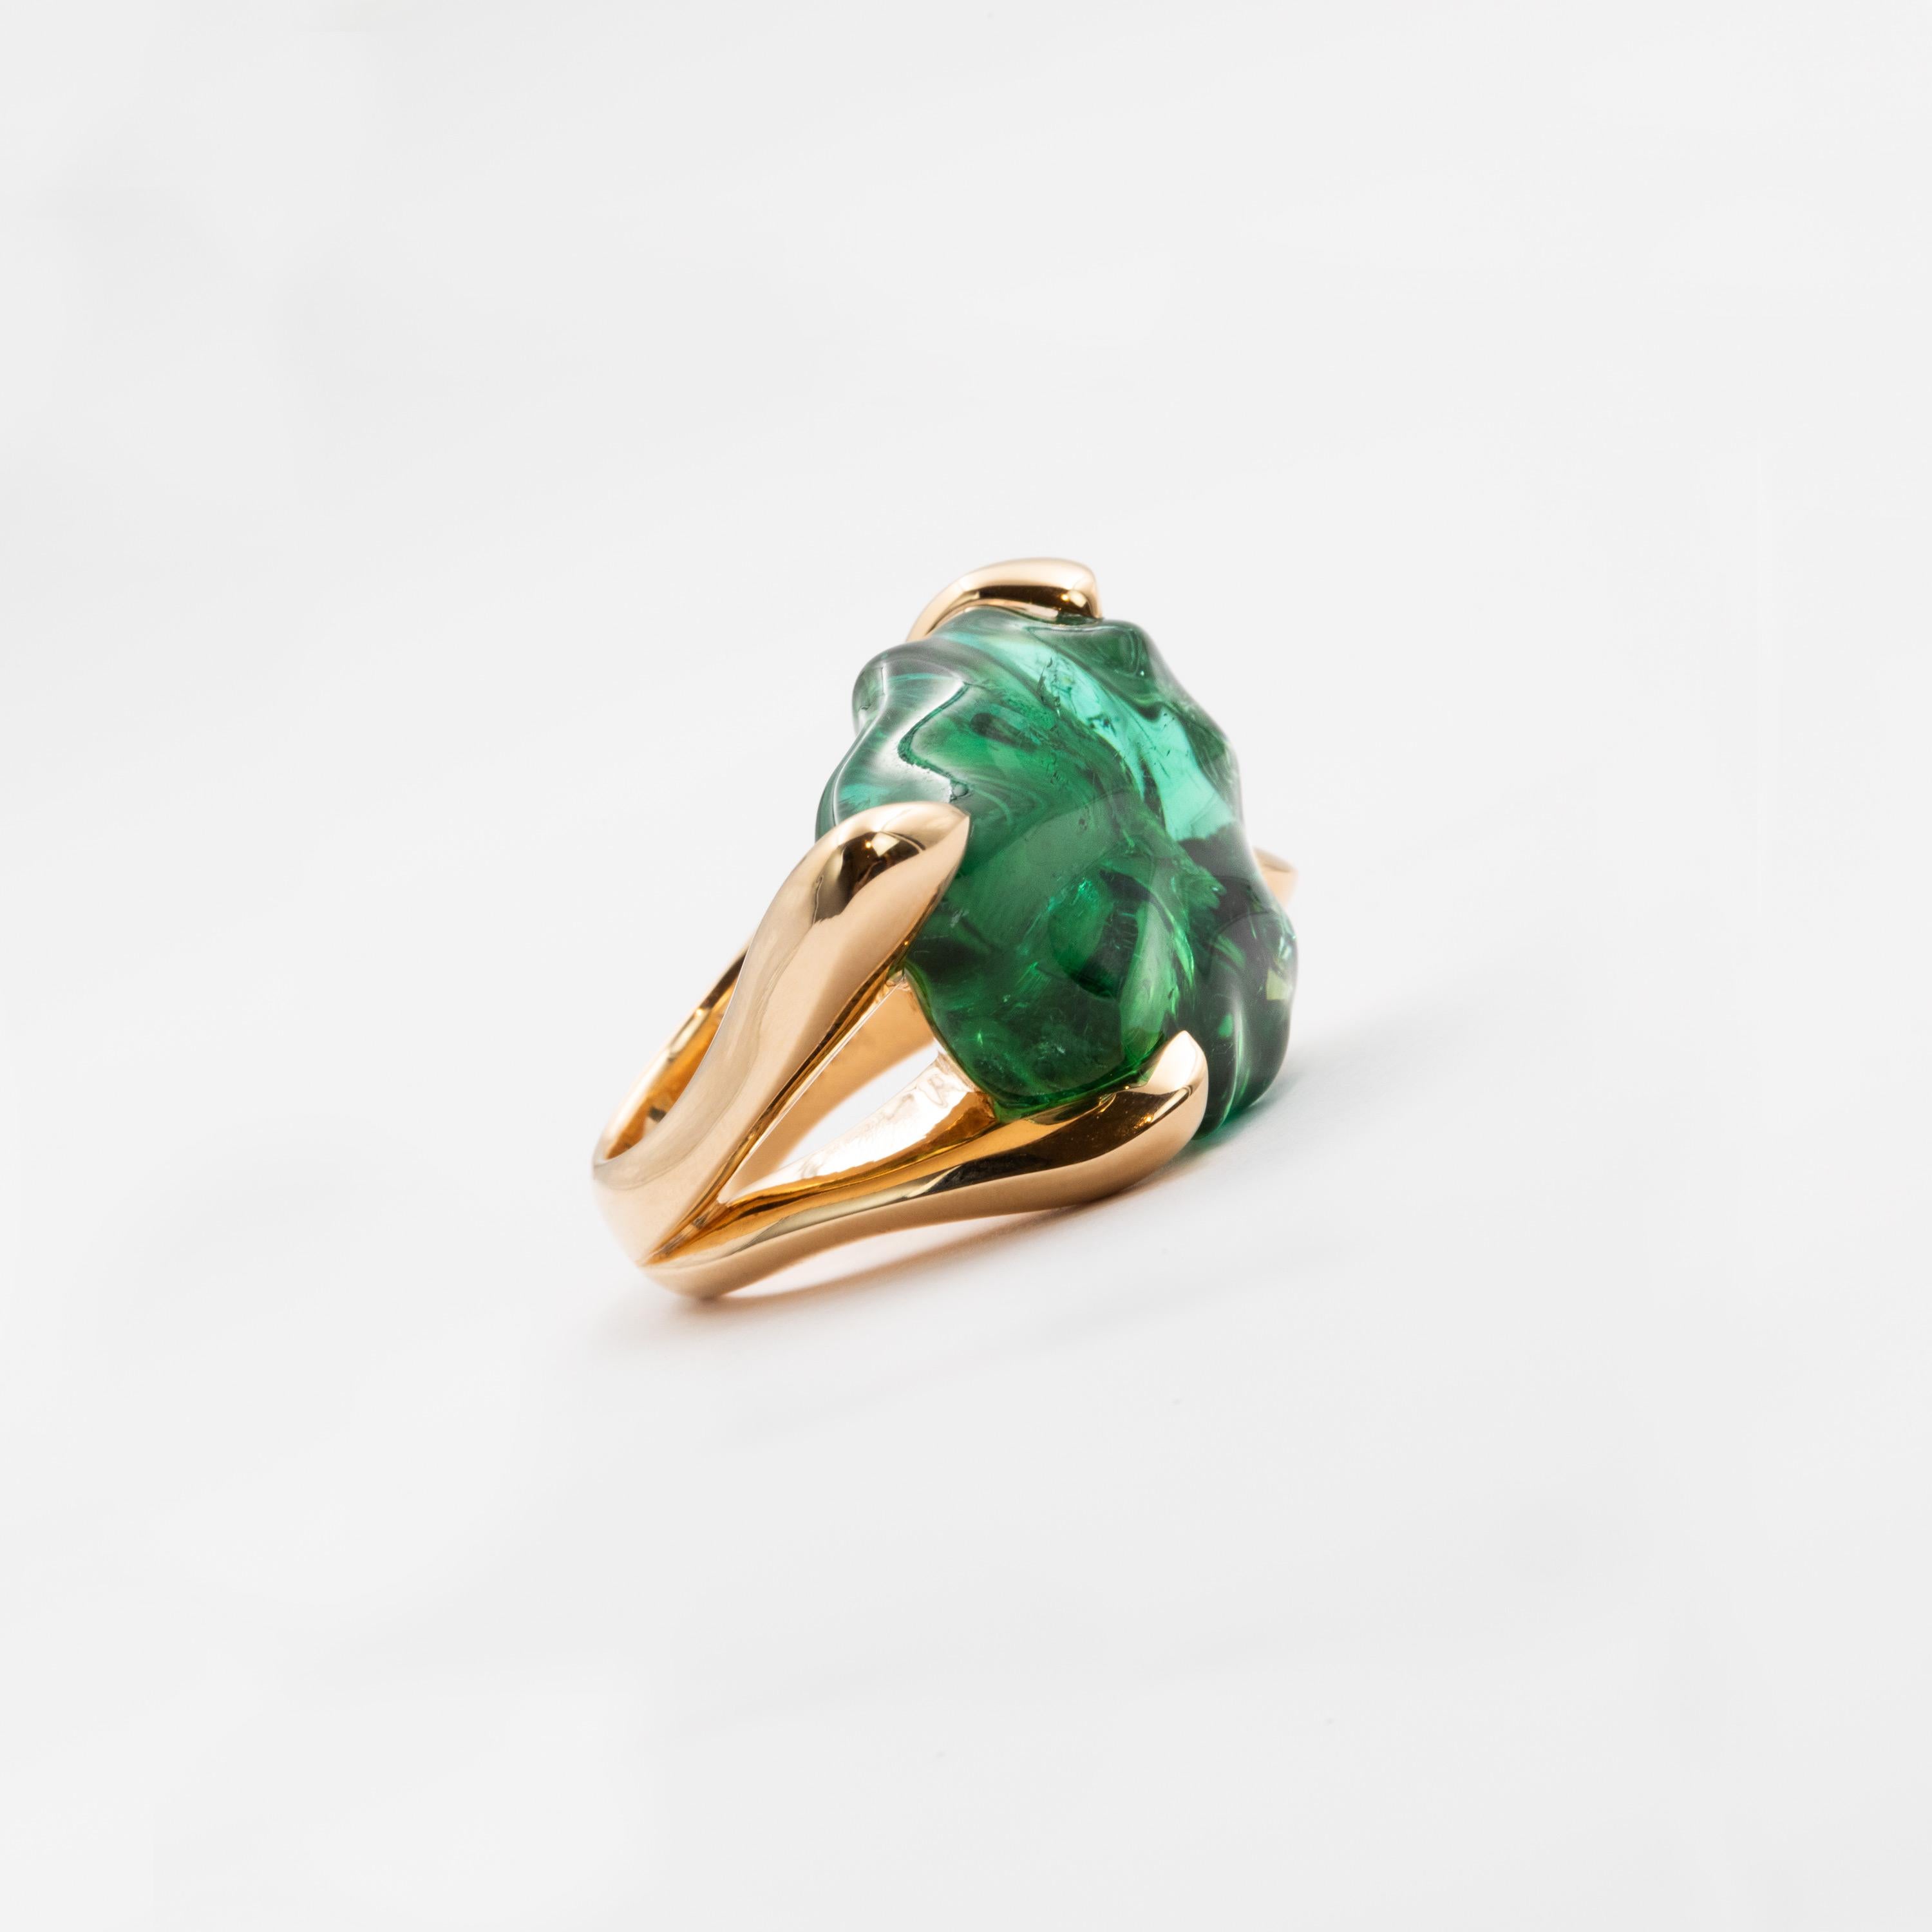 Contemporary 53.49 Carat Pink Gold Baroque-Cut Green Tourmaline Cocktail Ring For Sale